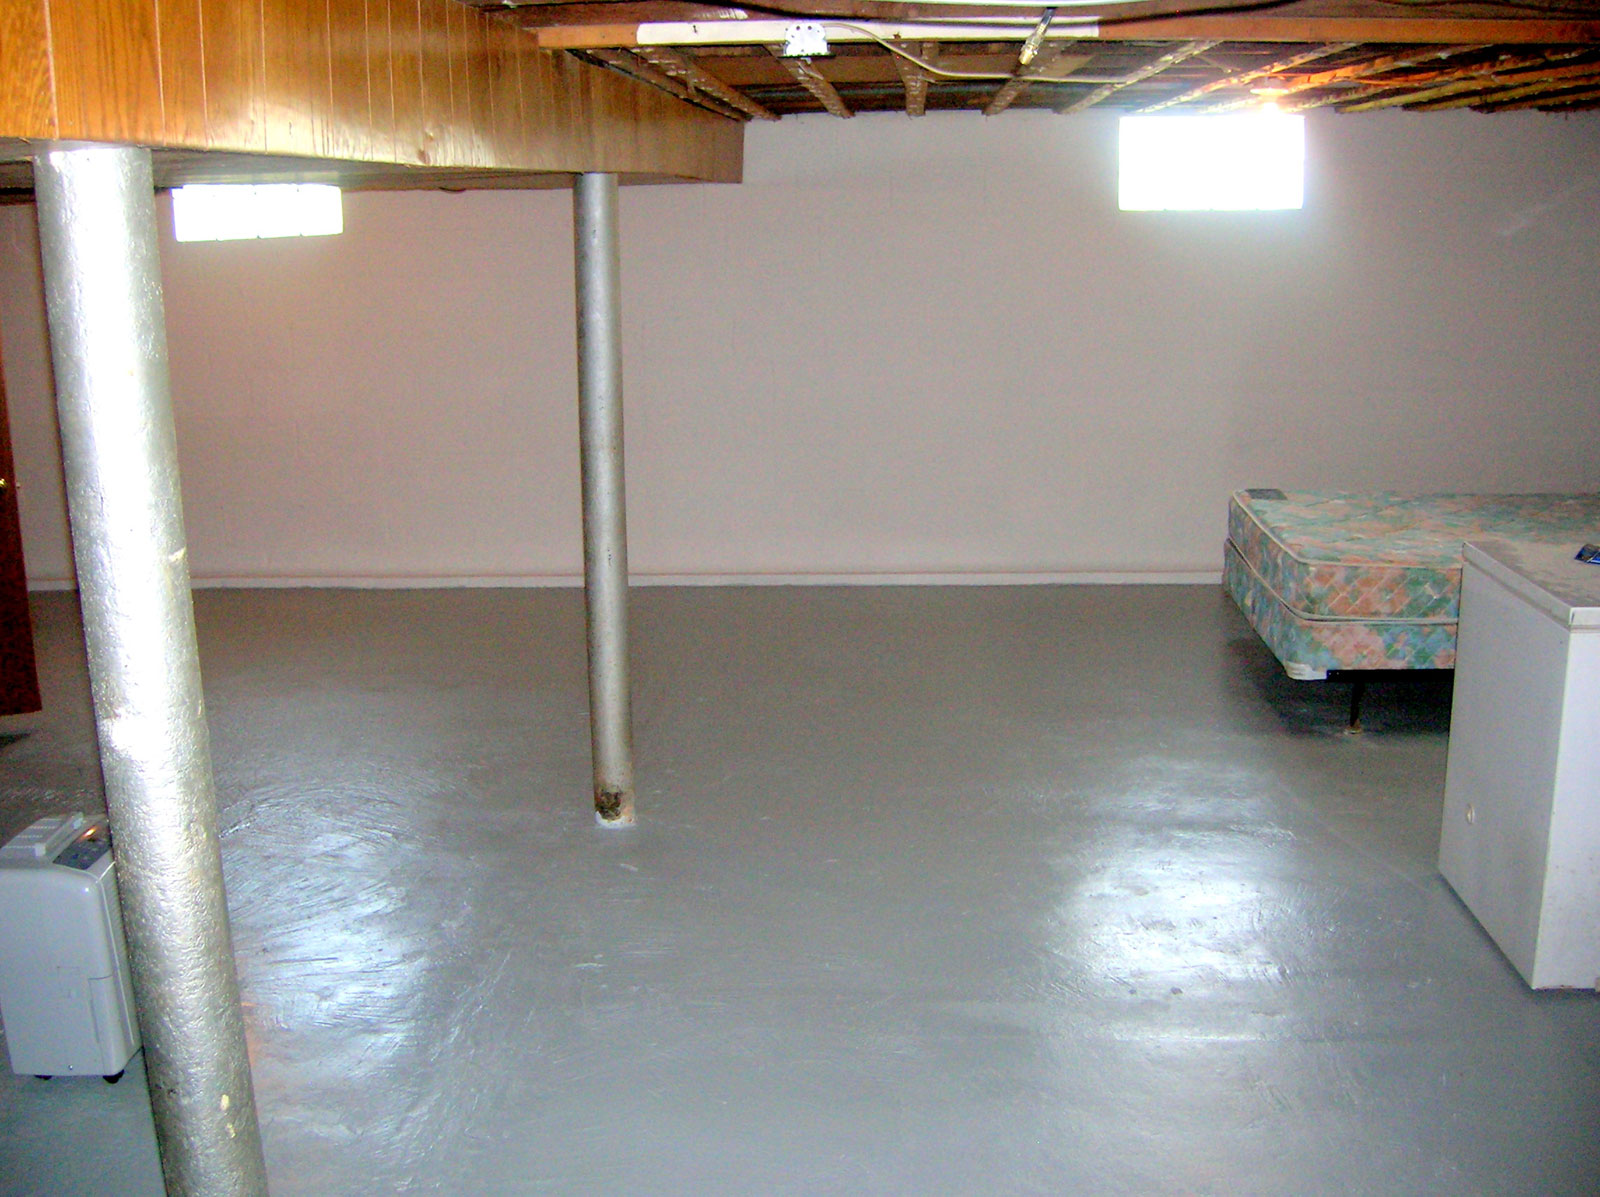 Painting Basement Color Extraordinary Painting Basement Floor Gray Color Design Ideas Finished In Modern Design Finished In Spacious Design Idea Decoration  Painting Basement Floor For The Least Expensive Solution 